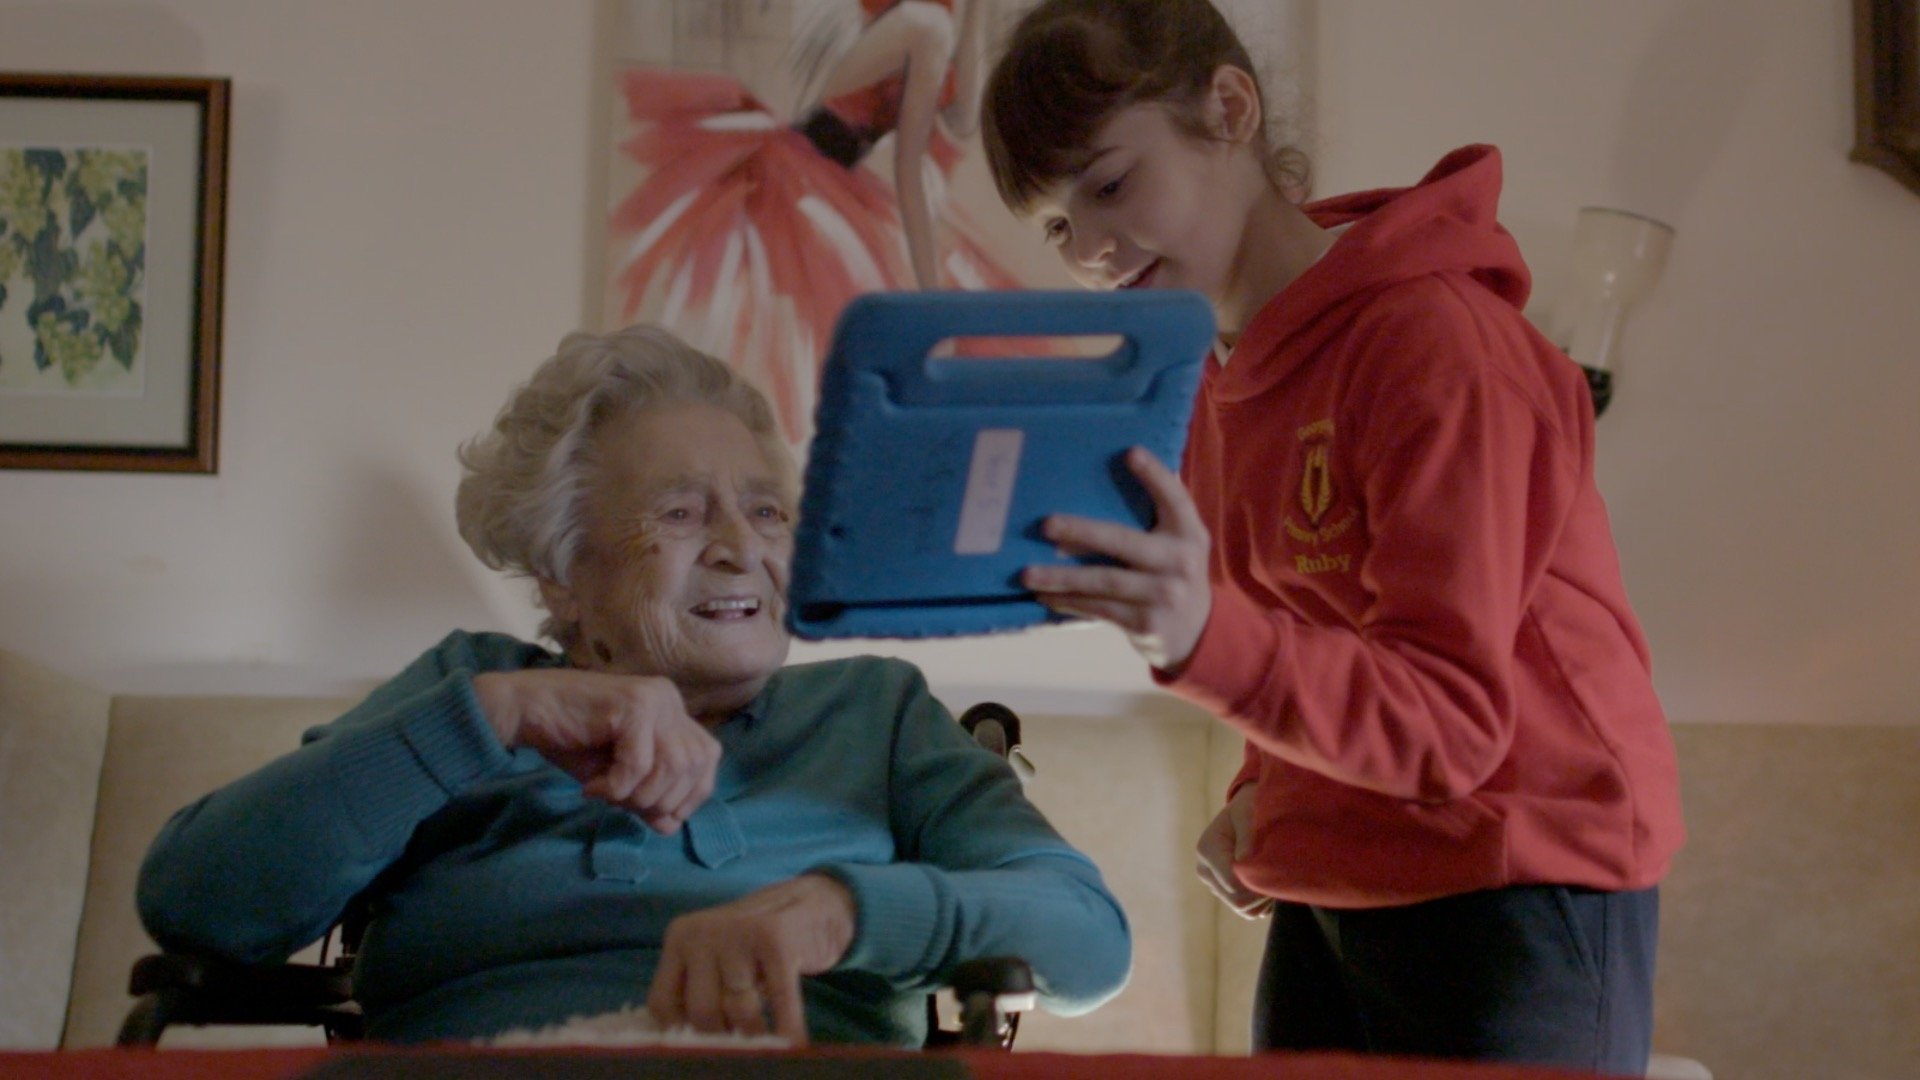 A photograph of a female school pupil Digital Hero standing next to a senior lady, showing her something on a tablet device.